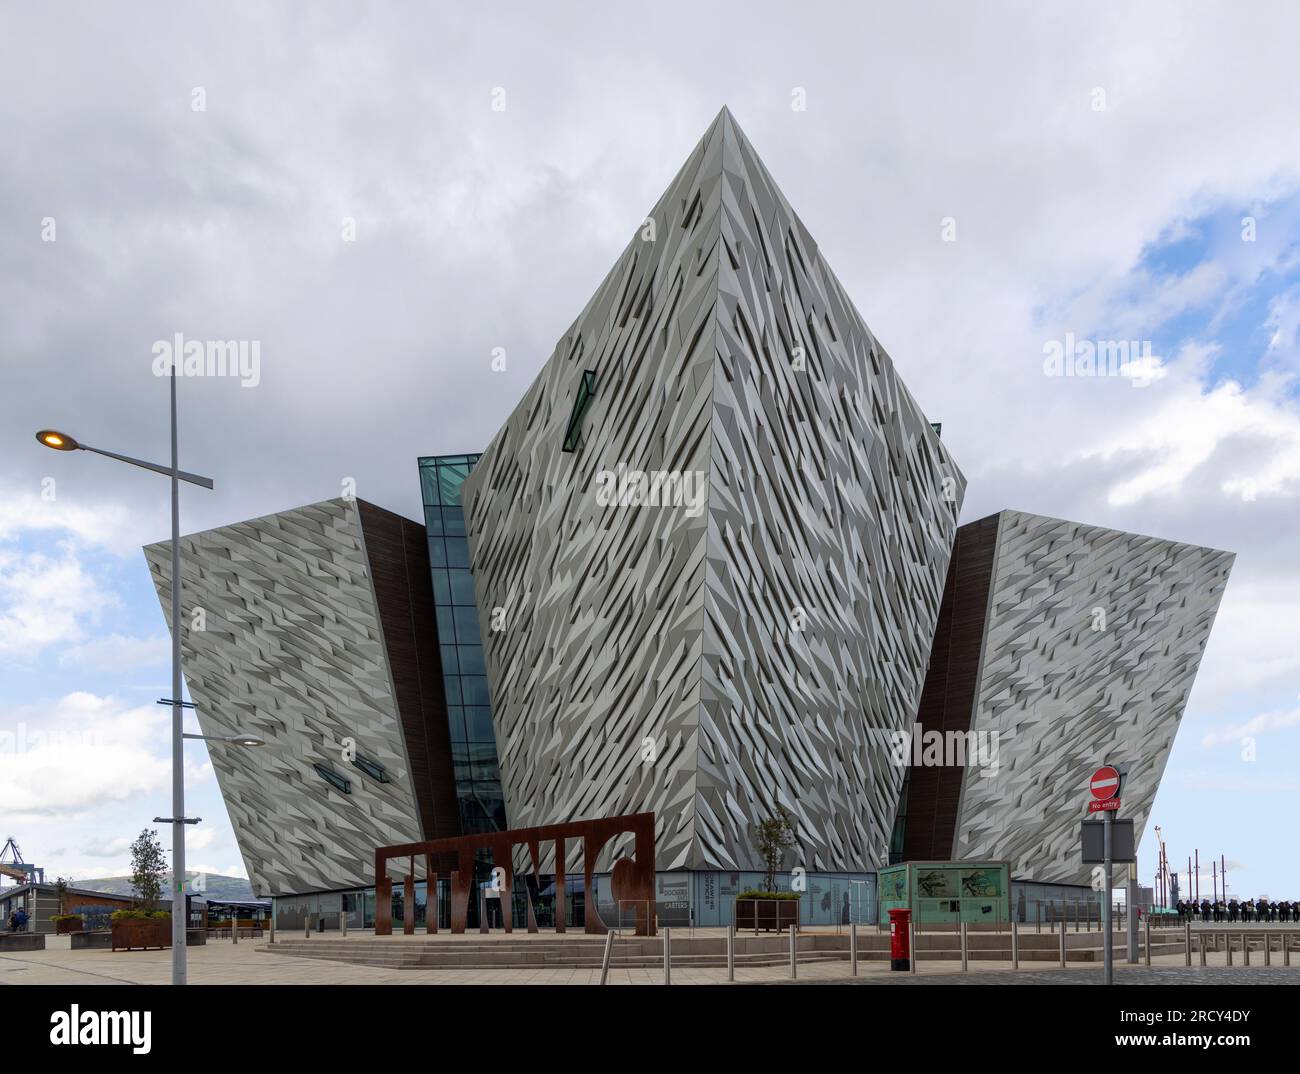 Titanic Building, seen from the front, located on the site of the former Harland & Wolff shipyard in Belfast, Northern Ireland. Stock Photo